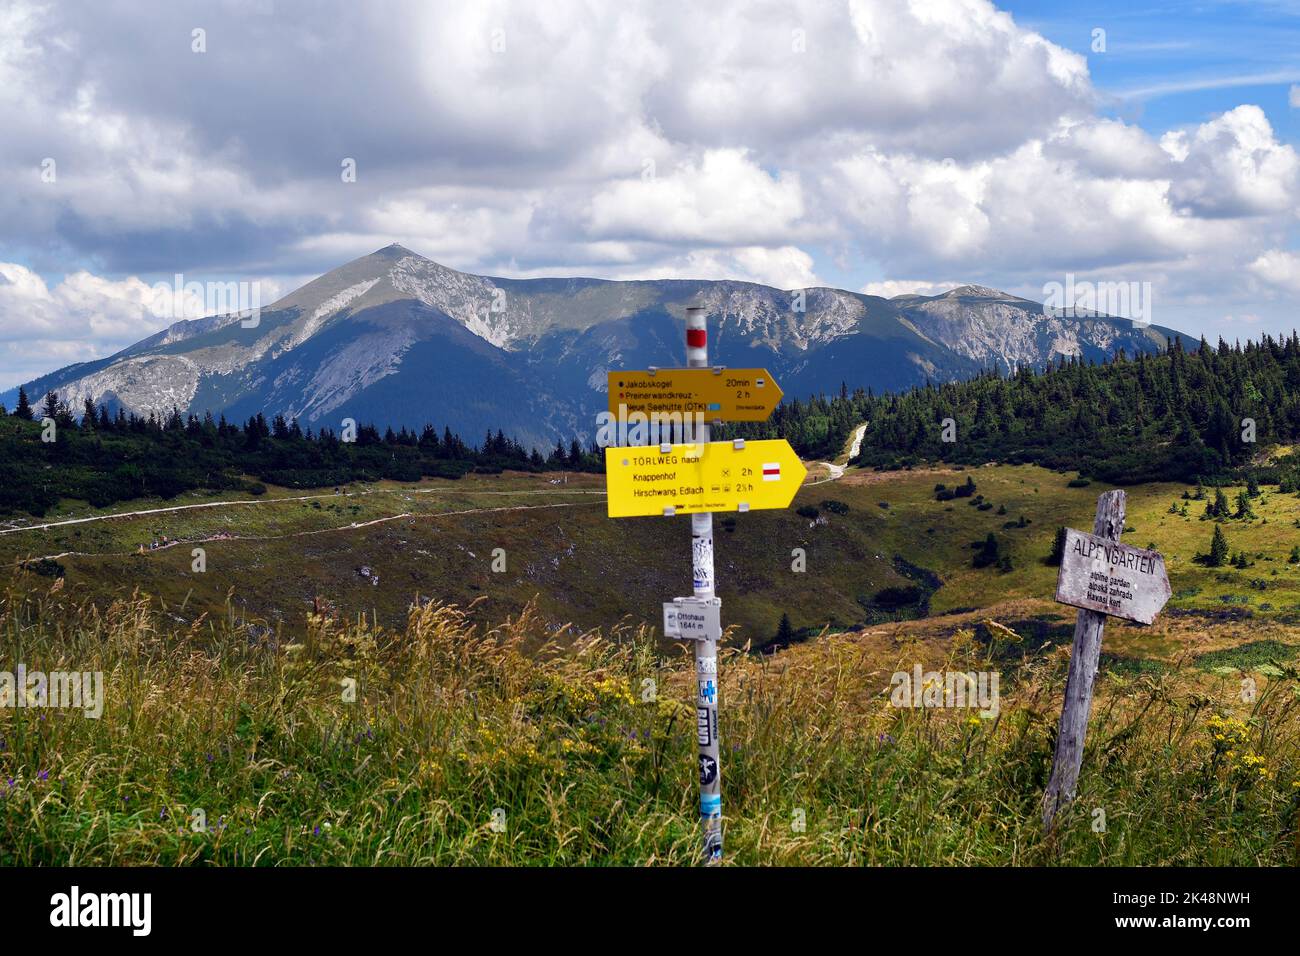 Austria, Rax mountain in Lower Austria, signposts with times to various destinations and Schneeberg mountain behind, part of the Vienna Alps Stock Photo